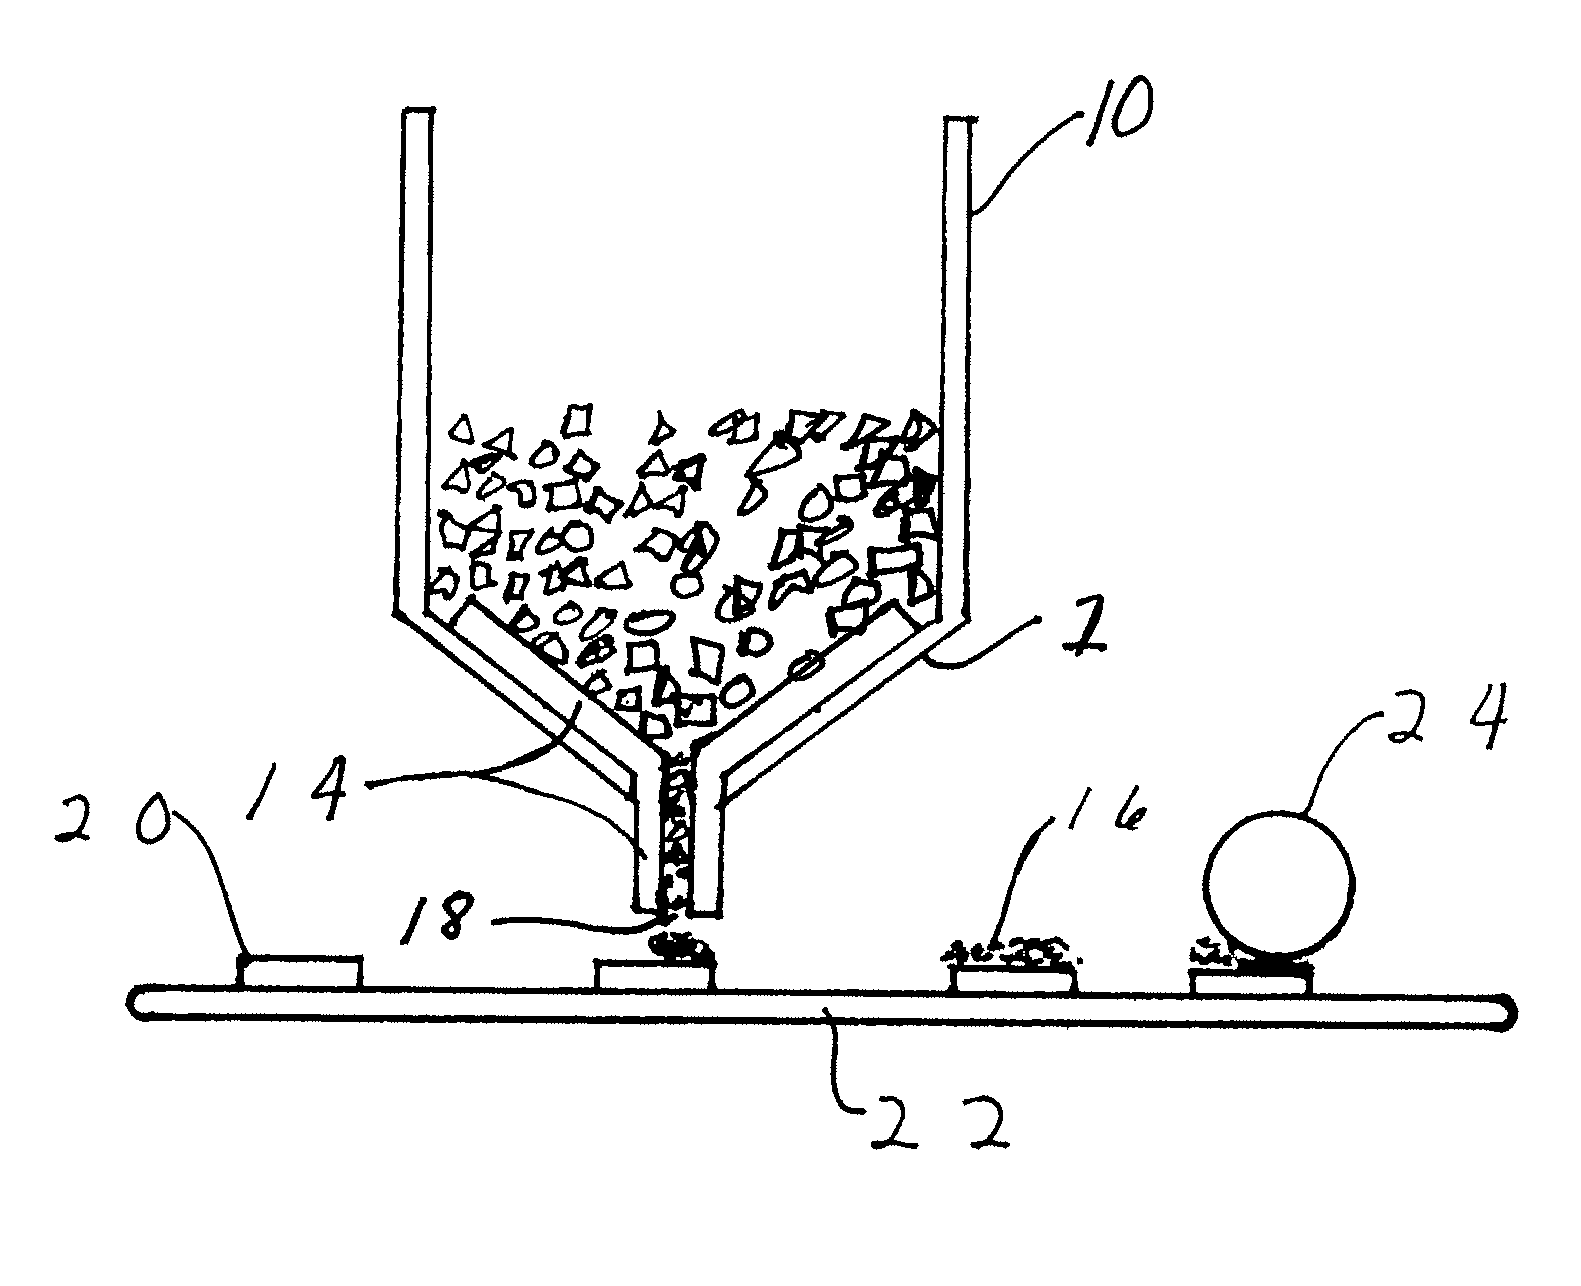 Nut butter compositions and methods related thereto